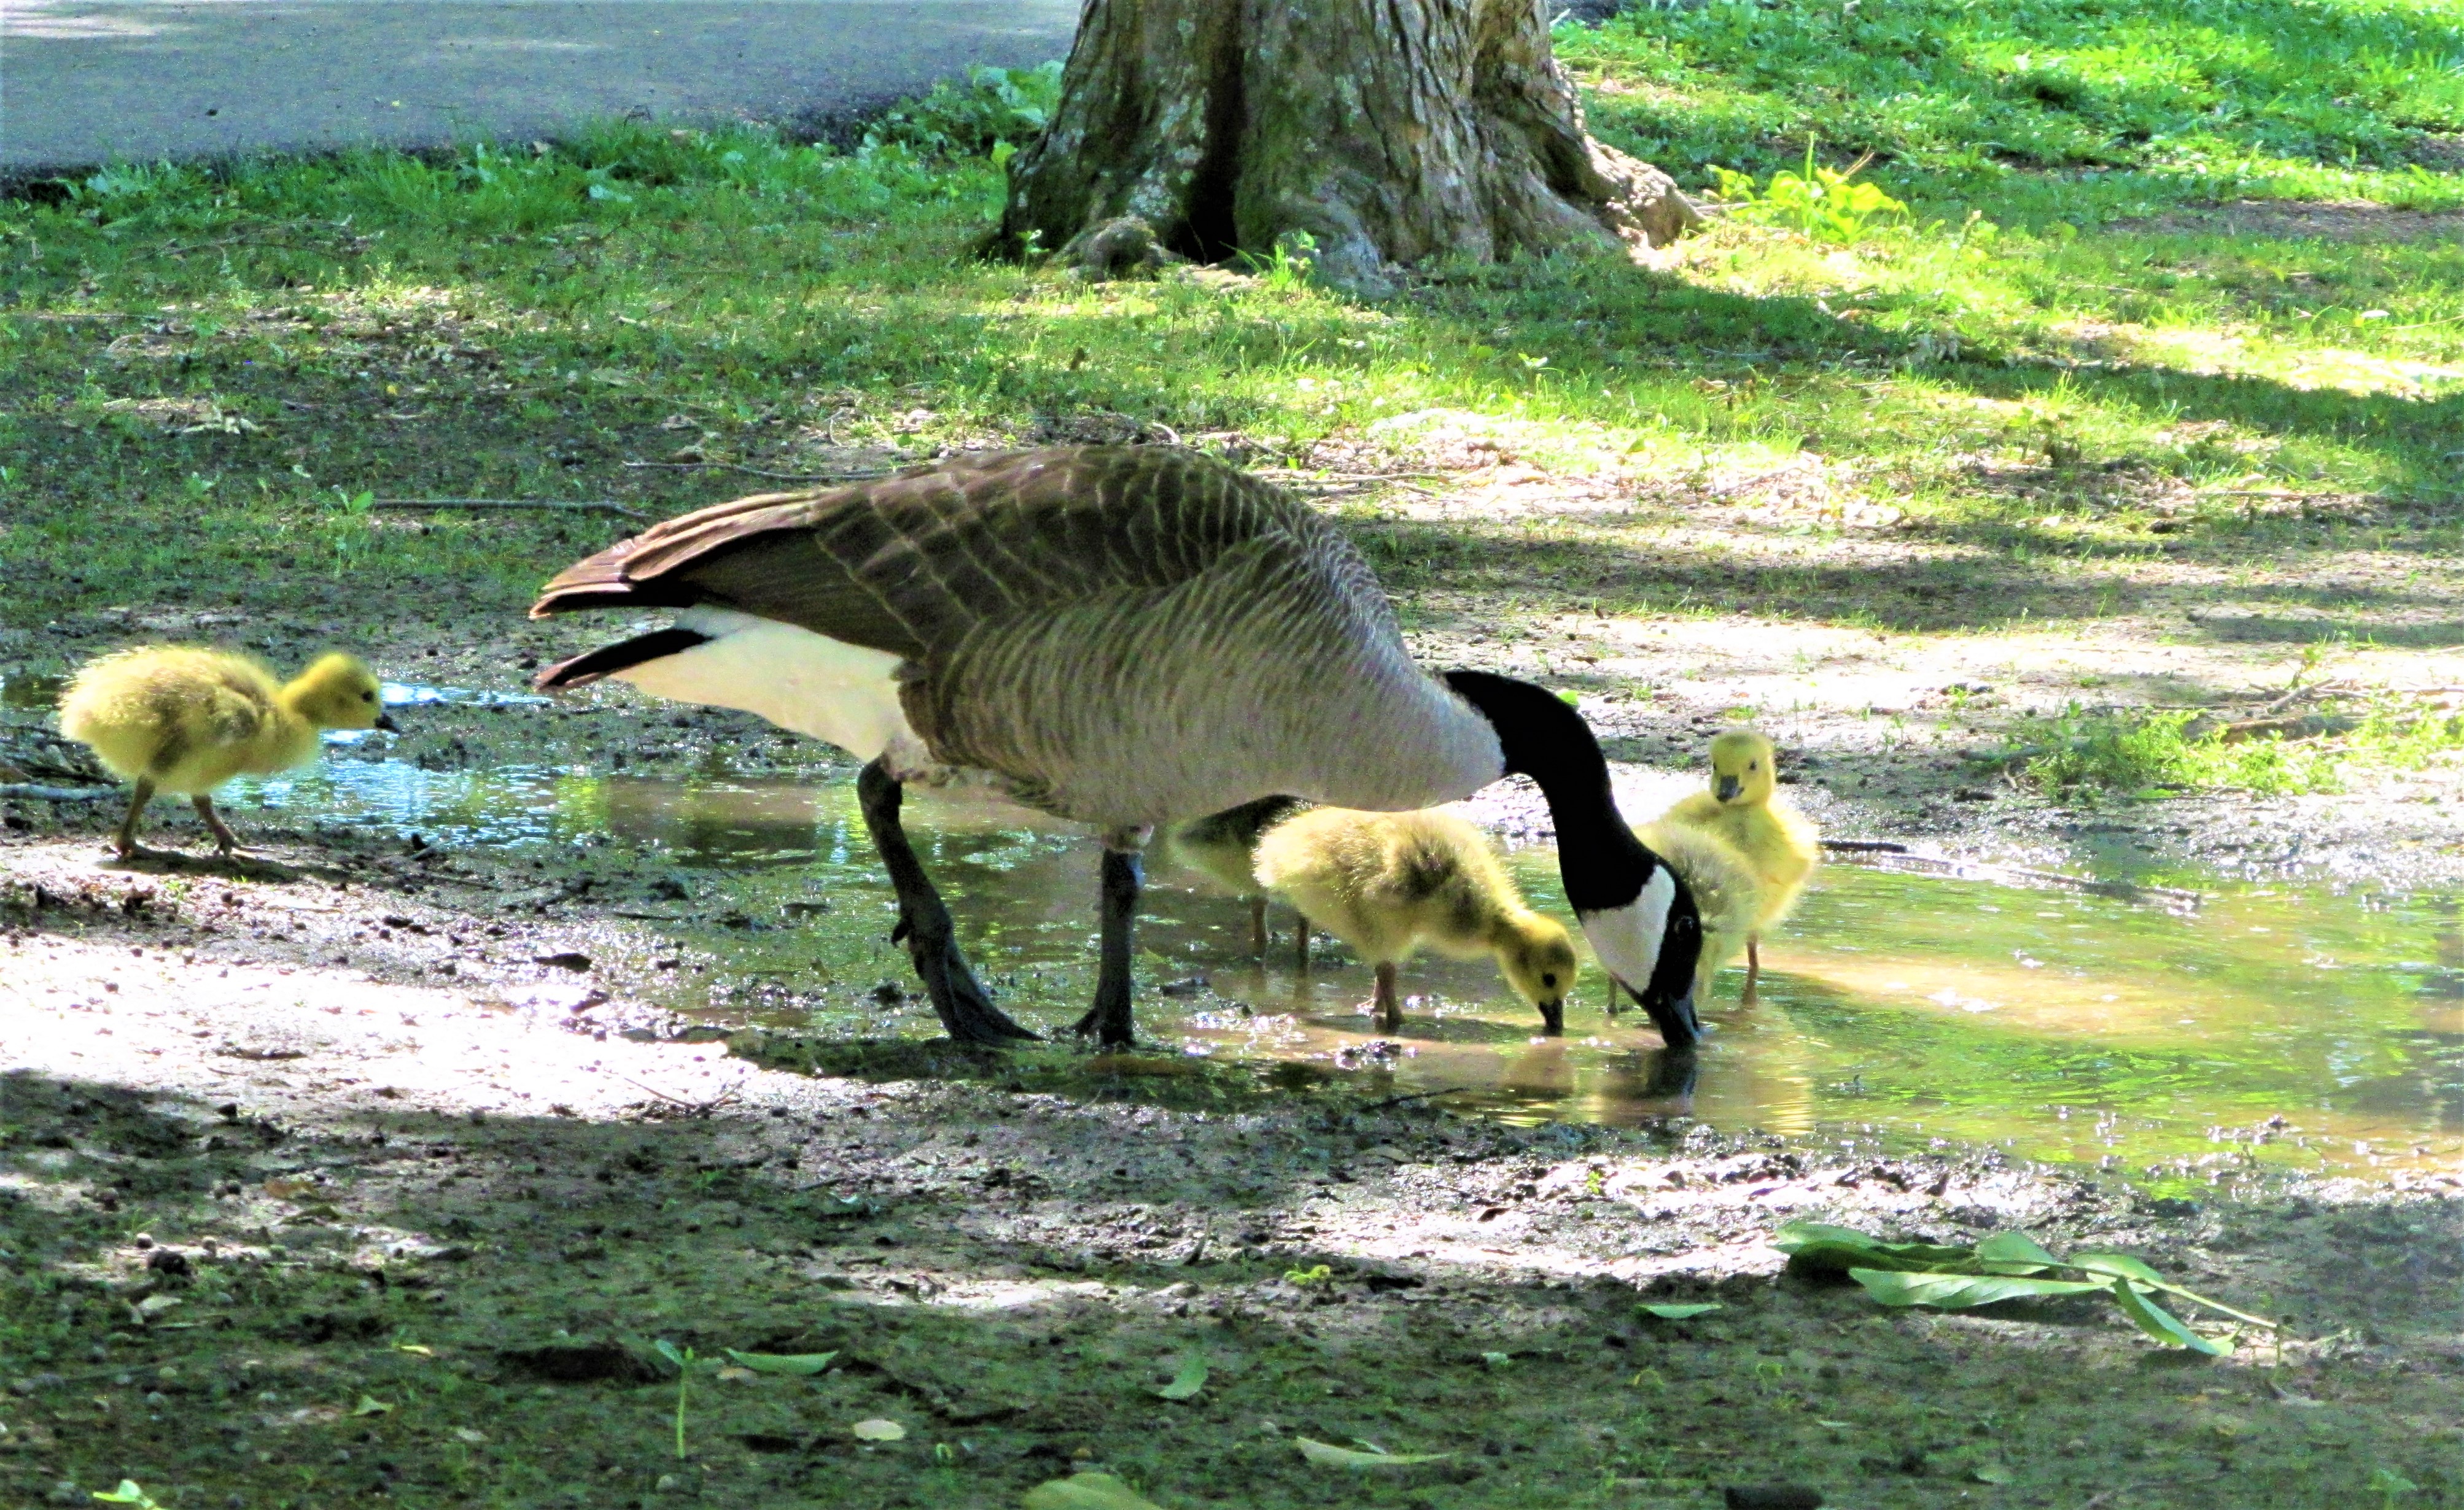 geese drinking water in strawberry park april 24